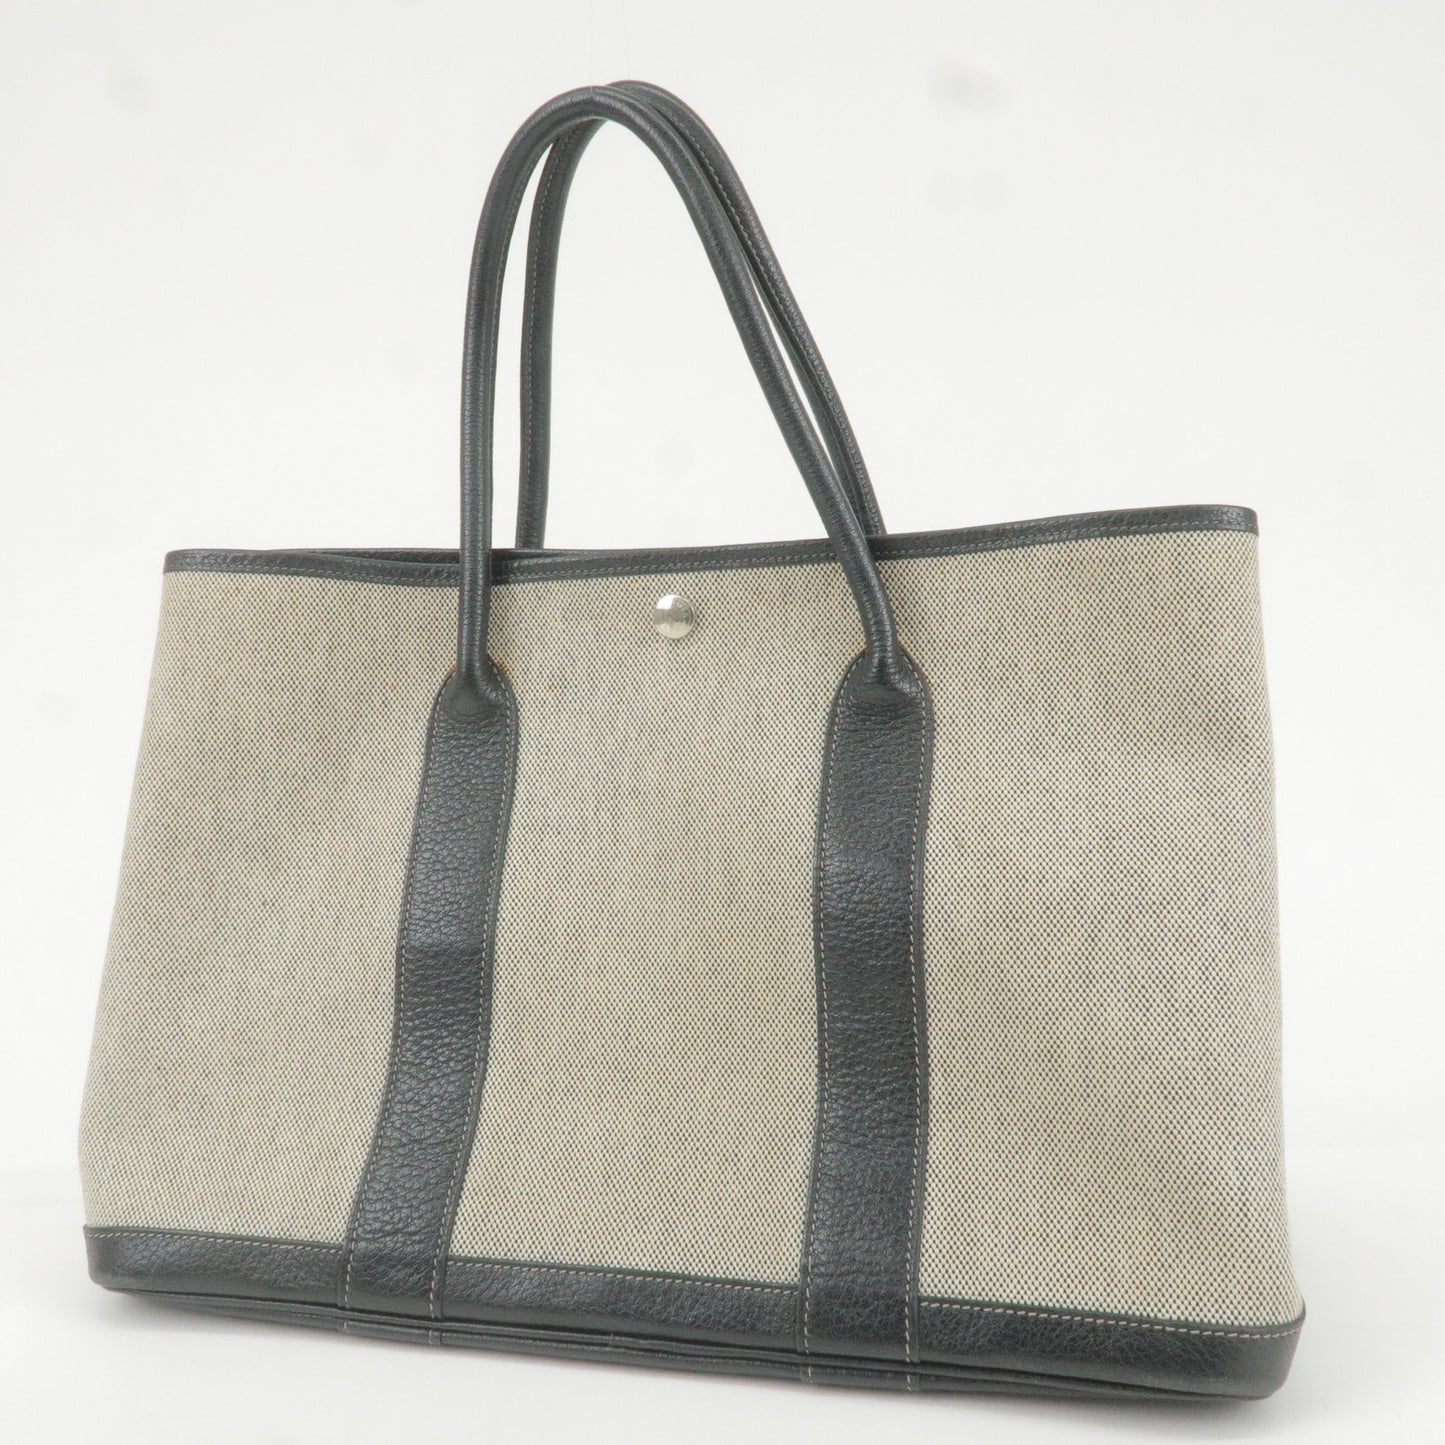 HERMES Garden Party PM Toile Ash Leather Tote Bag Gray Black